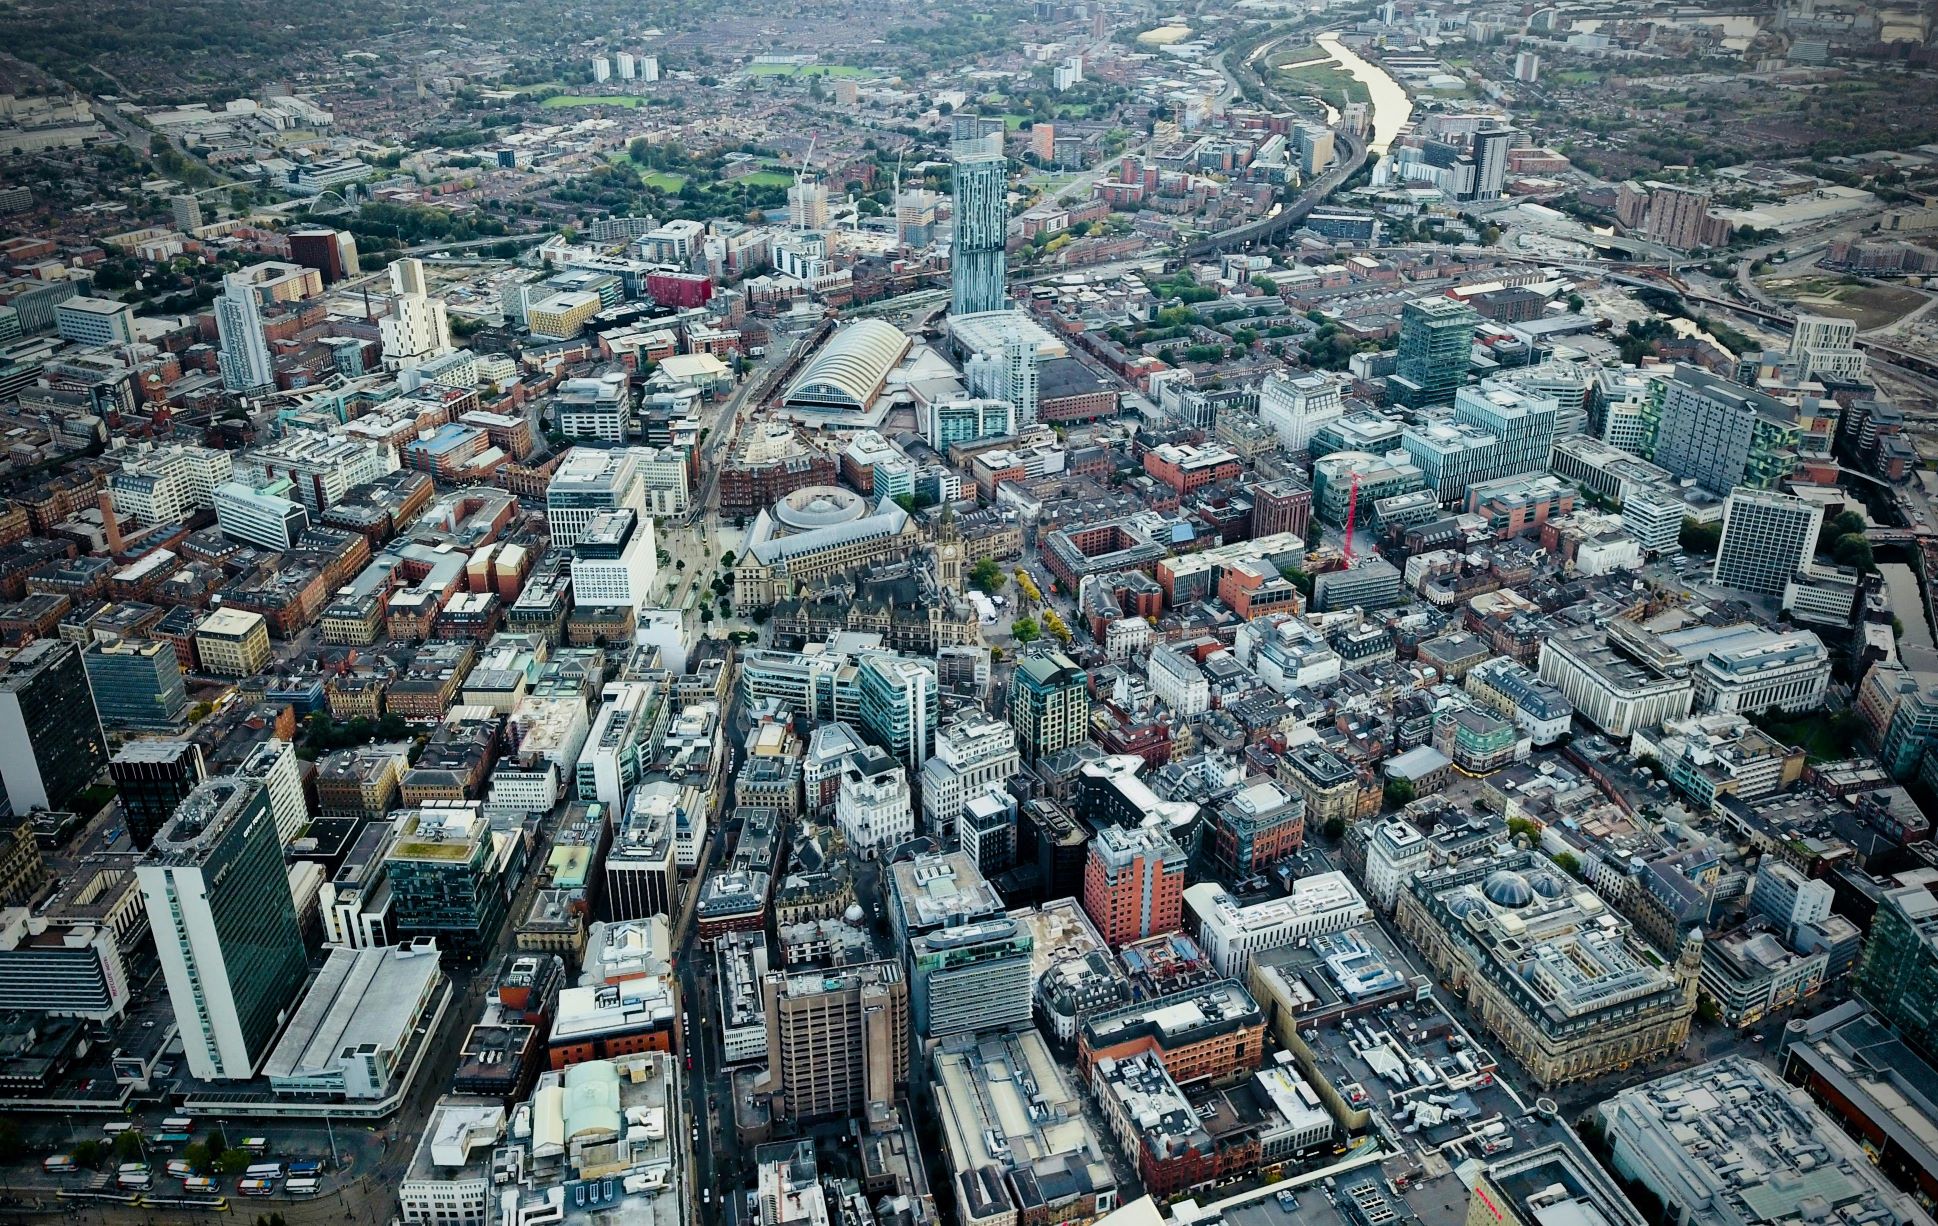 Overview of Manchester City Centre